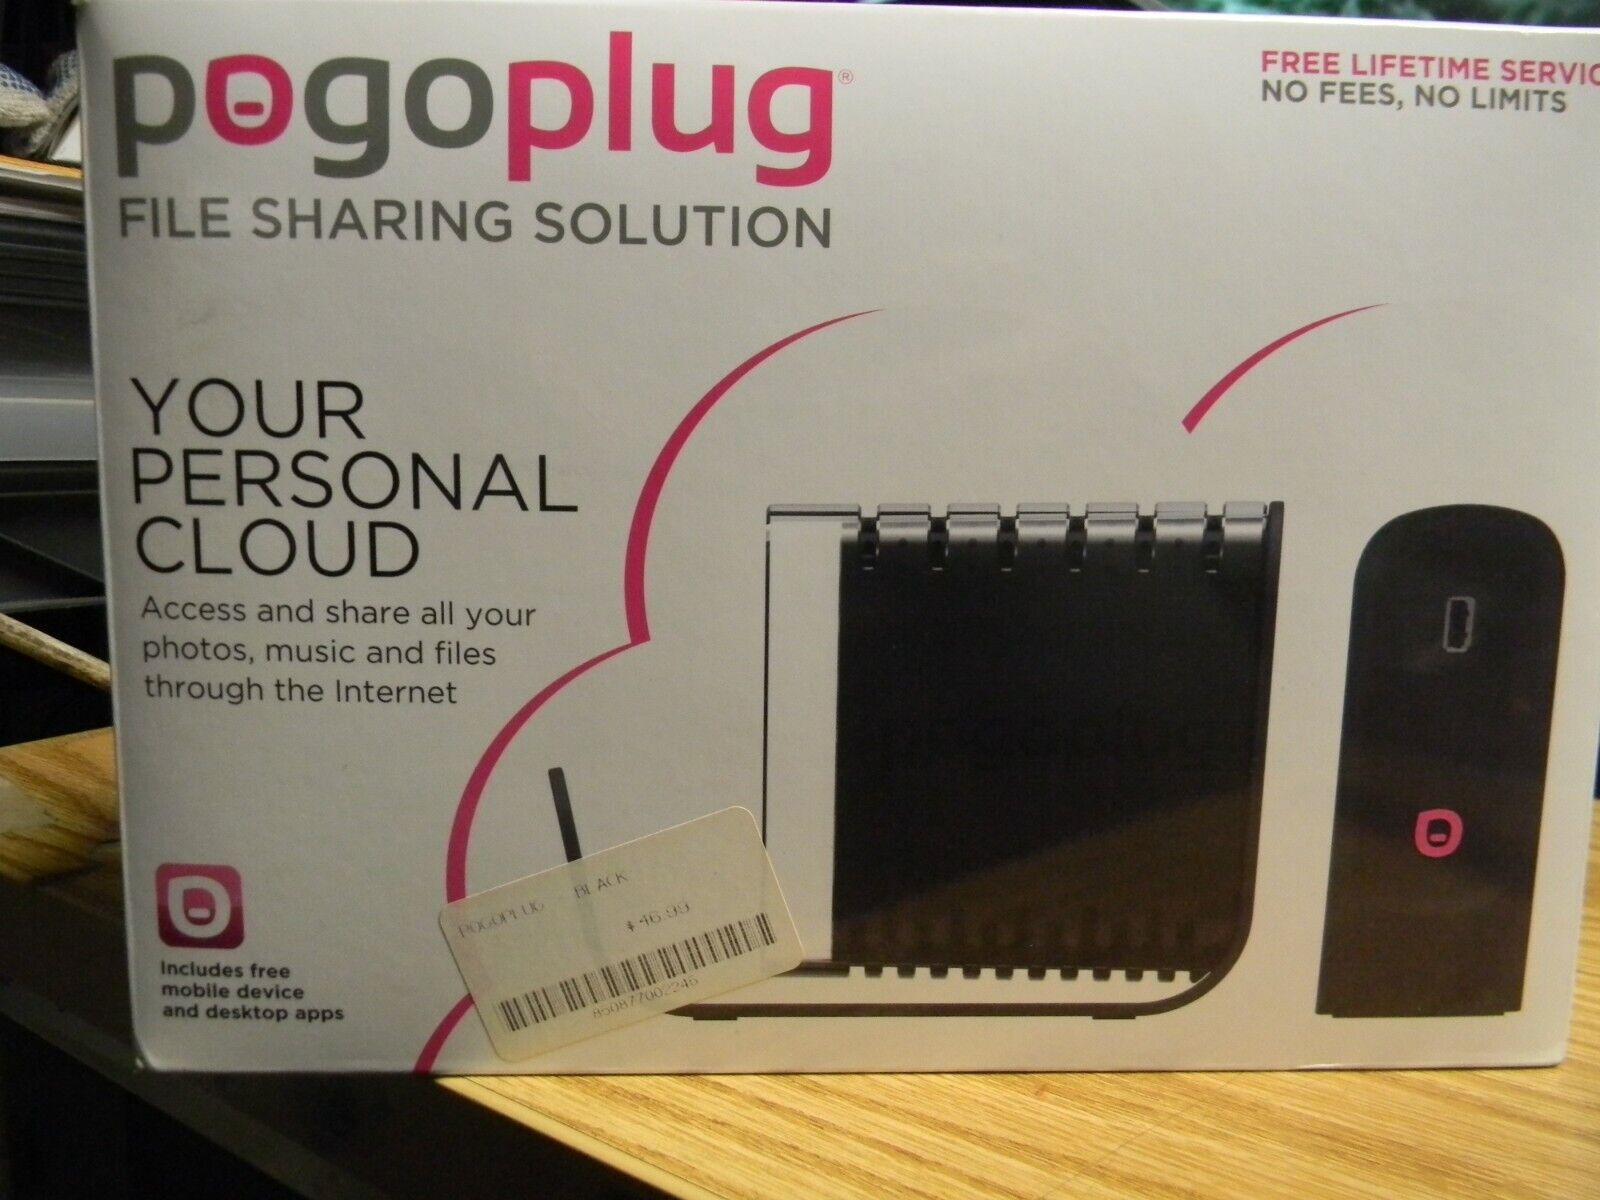 NEW POGO-P21 POGOPLUG File Sharing Solution Your Personal Cloud EO2 version